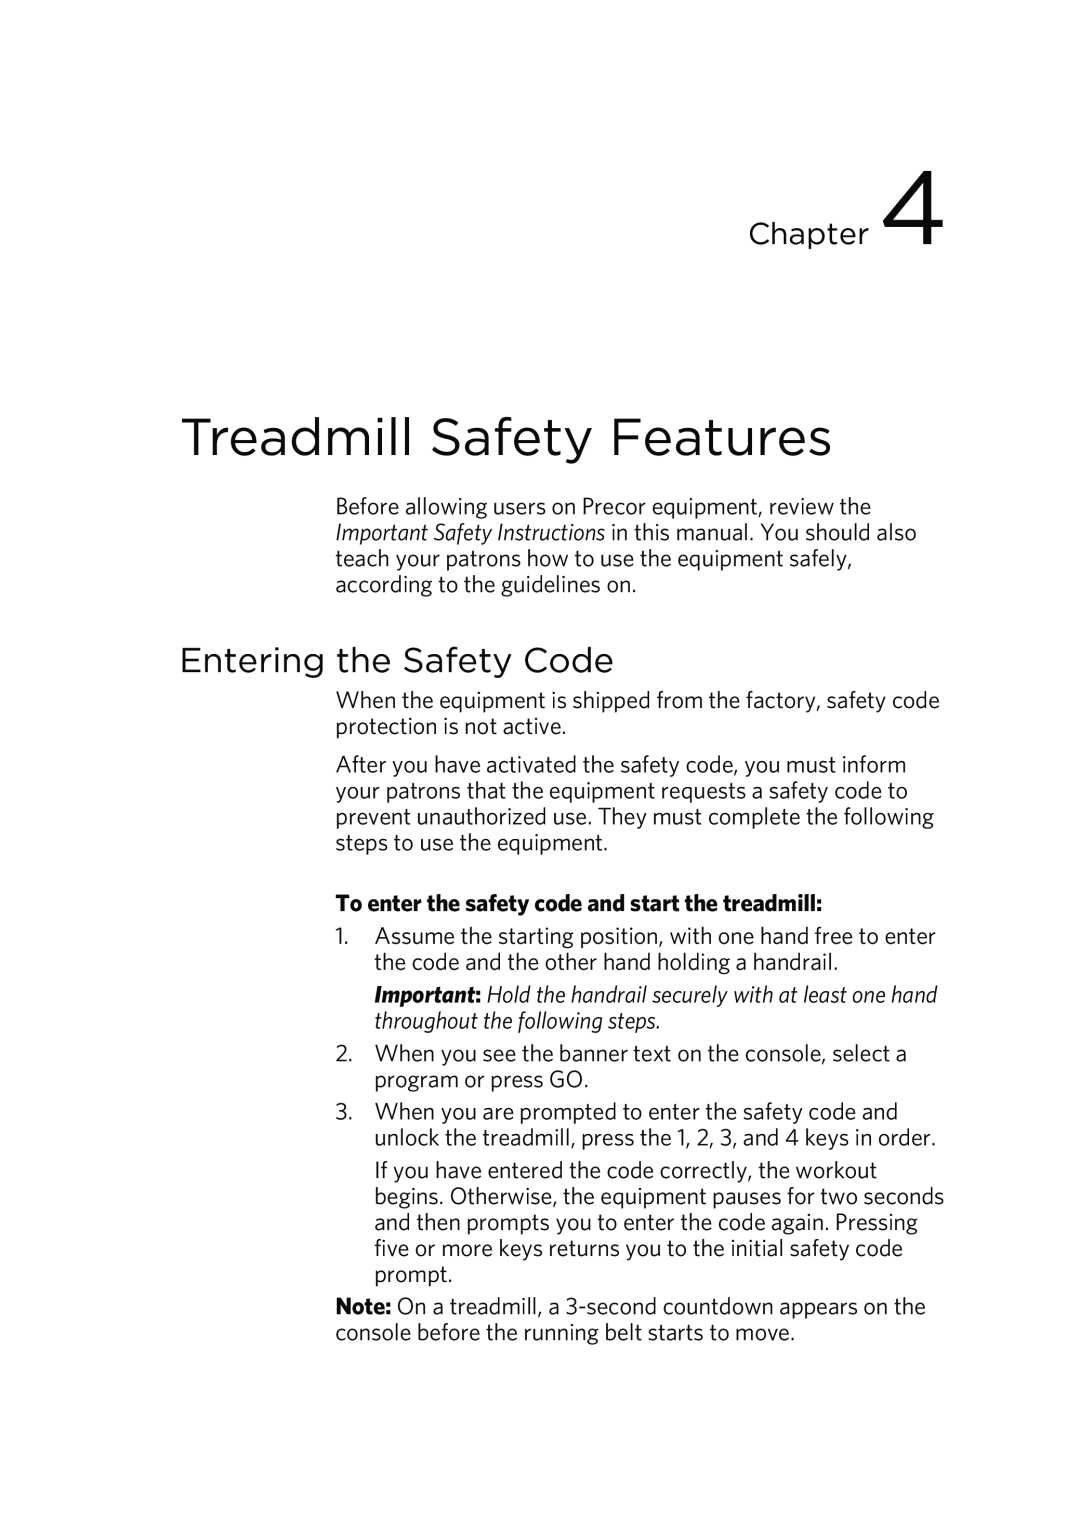 Precor P80 Treadmill Safety Features, Entering the Safety Code, To enter the safety code and start the treadmill, Chapter 